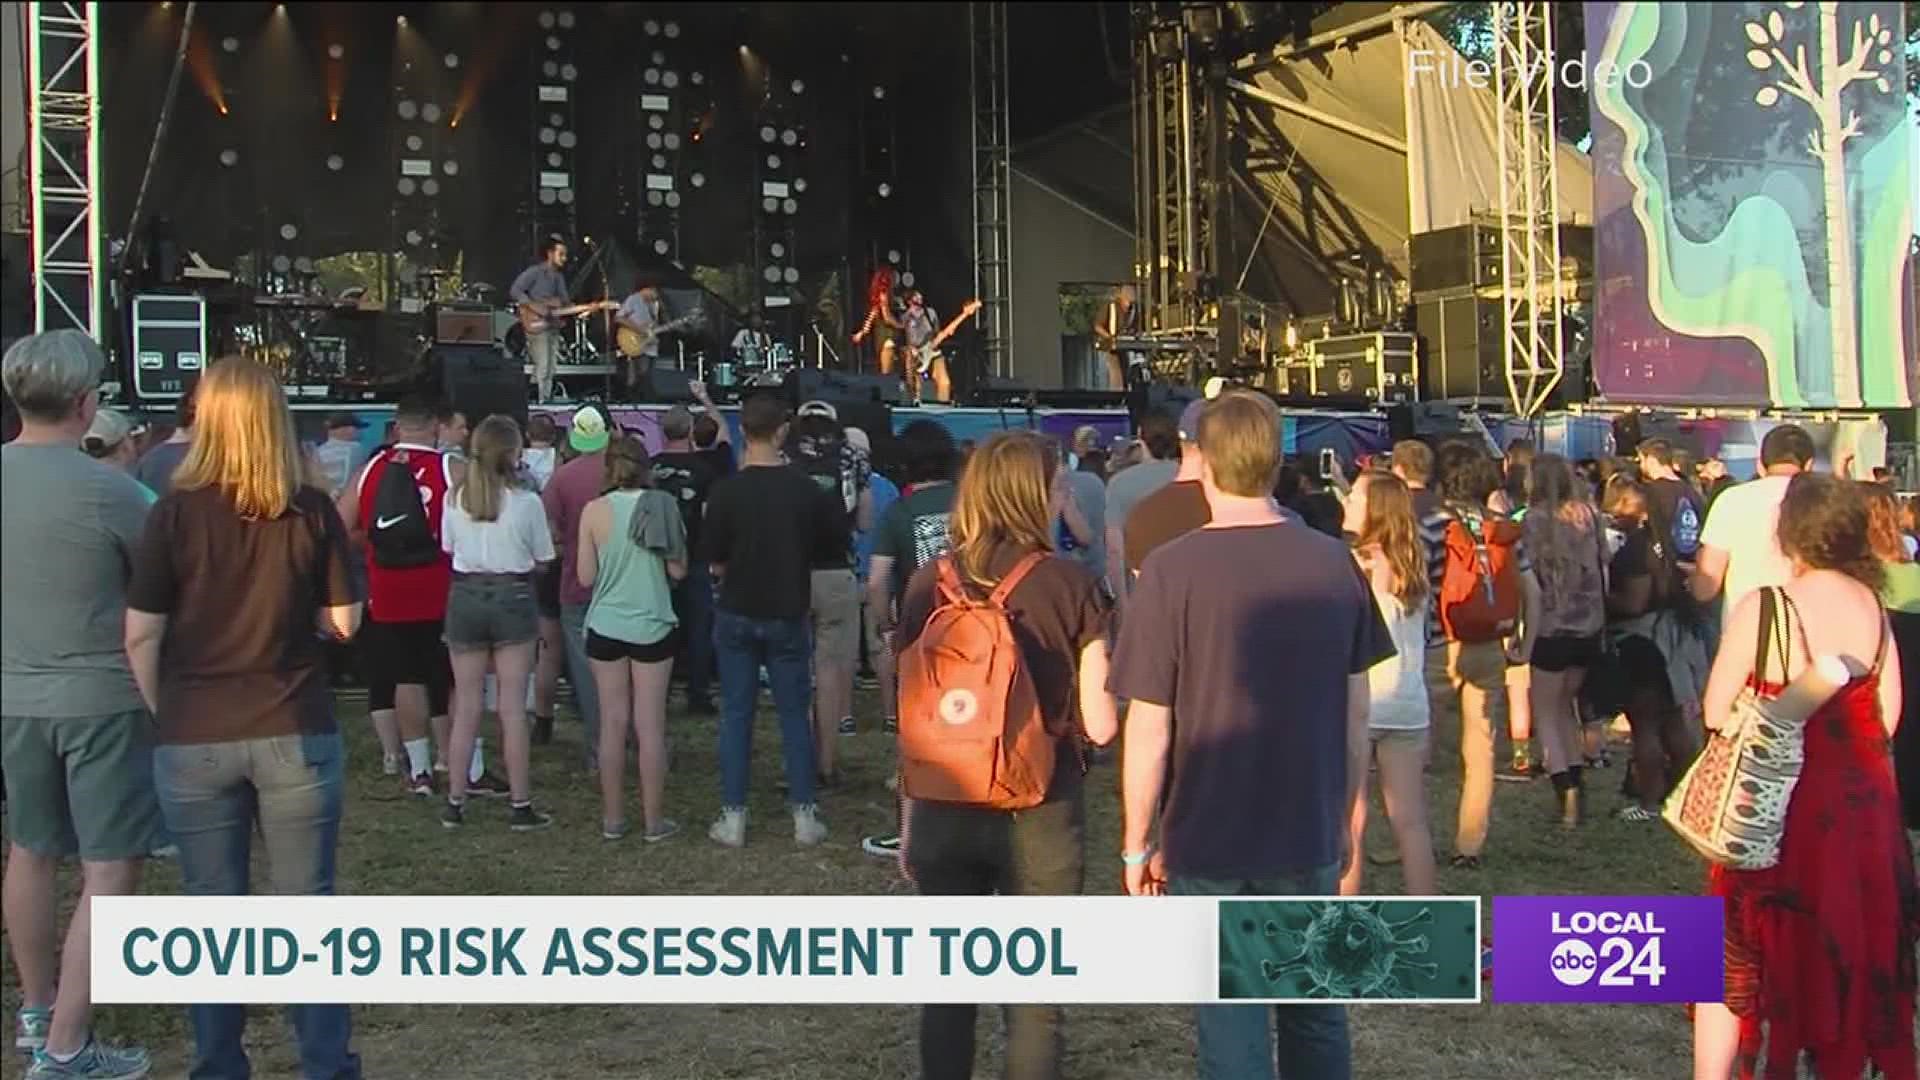 An event assessment tool helps you assess the risk you face in crowds of different sizes.